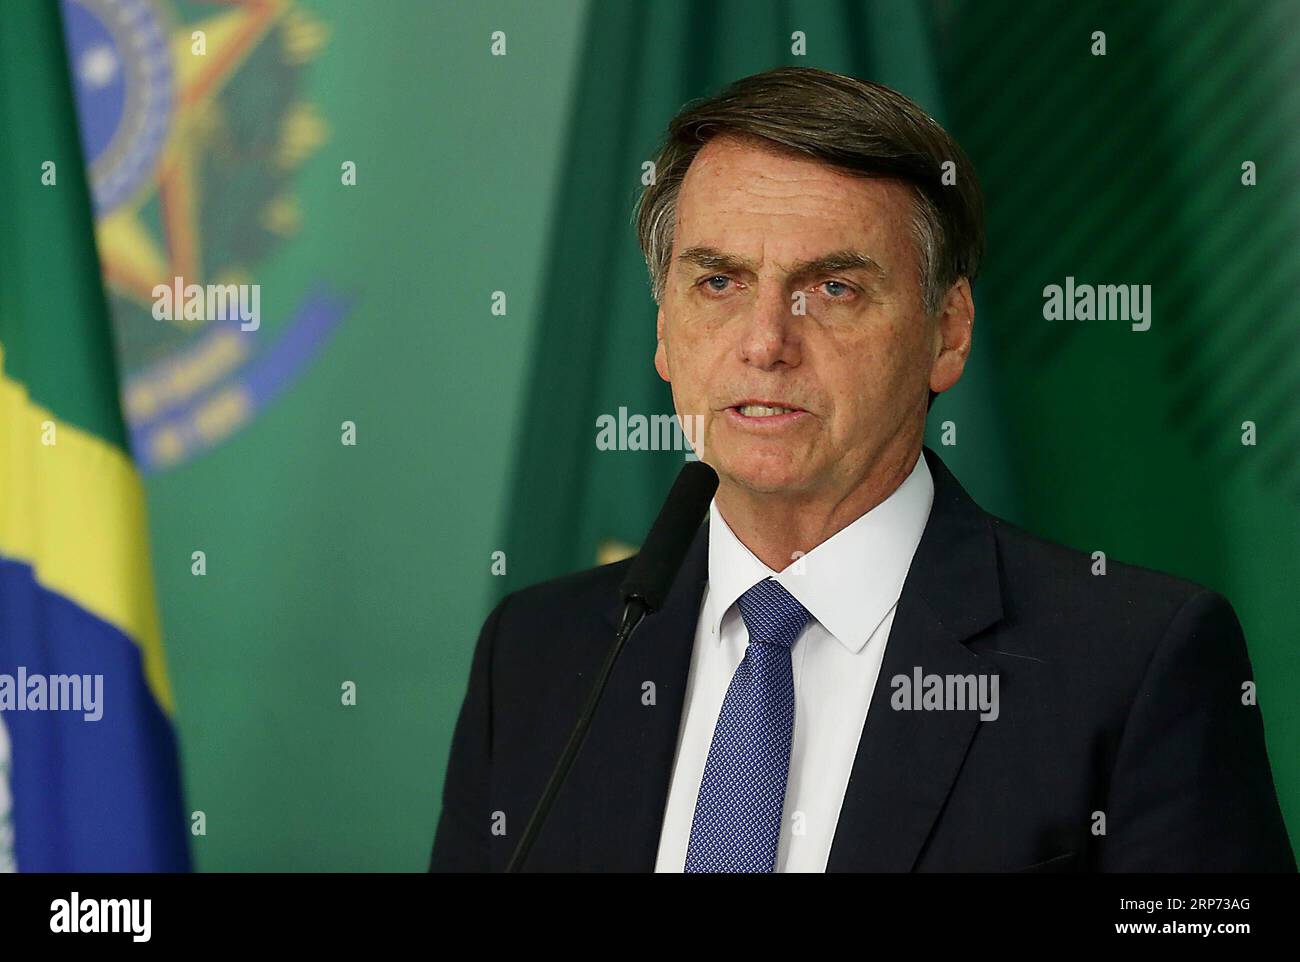 (190126) -- BRASILIA, Jan. 26, 2019 -- Brazil s President Jair Bolsonaro attends a press conference on the collapse of a dam, at Planalto Palace, in Brasilia, capital of Brazil, on Jan. 25, 2019. At least seven people were killed, nine injured and at least 150 others are missing after a tailings dam collapsed Friday afternoon in southeastern state of Minas Gerais, the state government said Friday evening. Ernesto Rodrigues/) BRAZIL-BRASILIA-MINAS GERAIS-DAM-COLLAPSE AGENCIAxESTADO PUBLICATIONxNOTxINxCHN Stock Photo